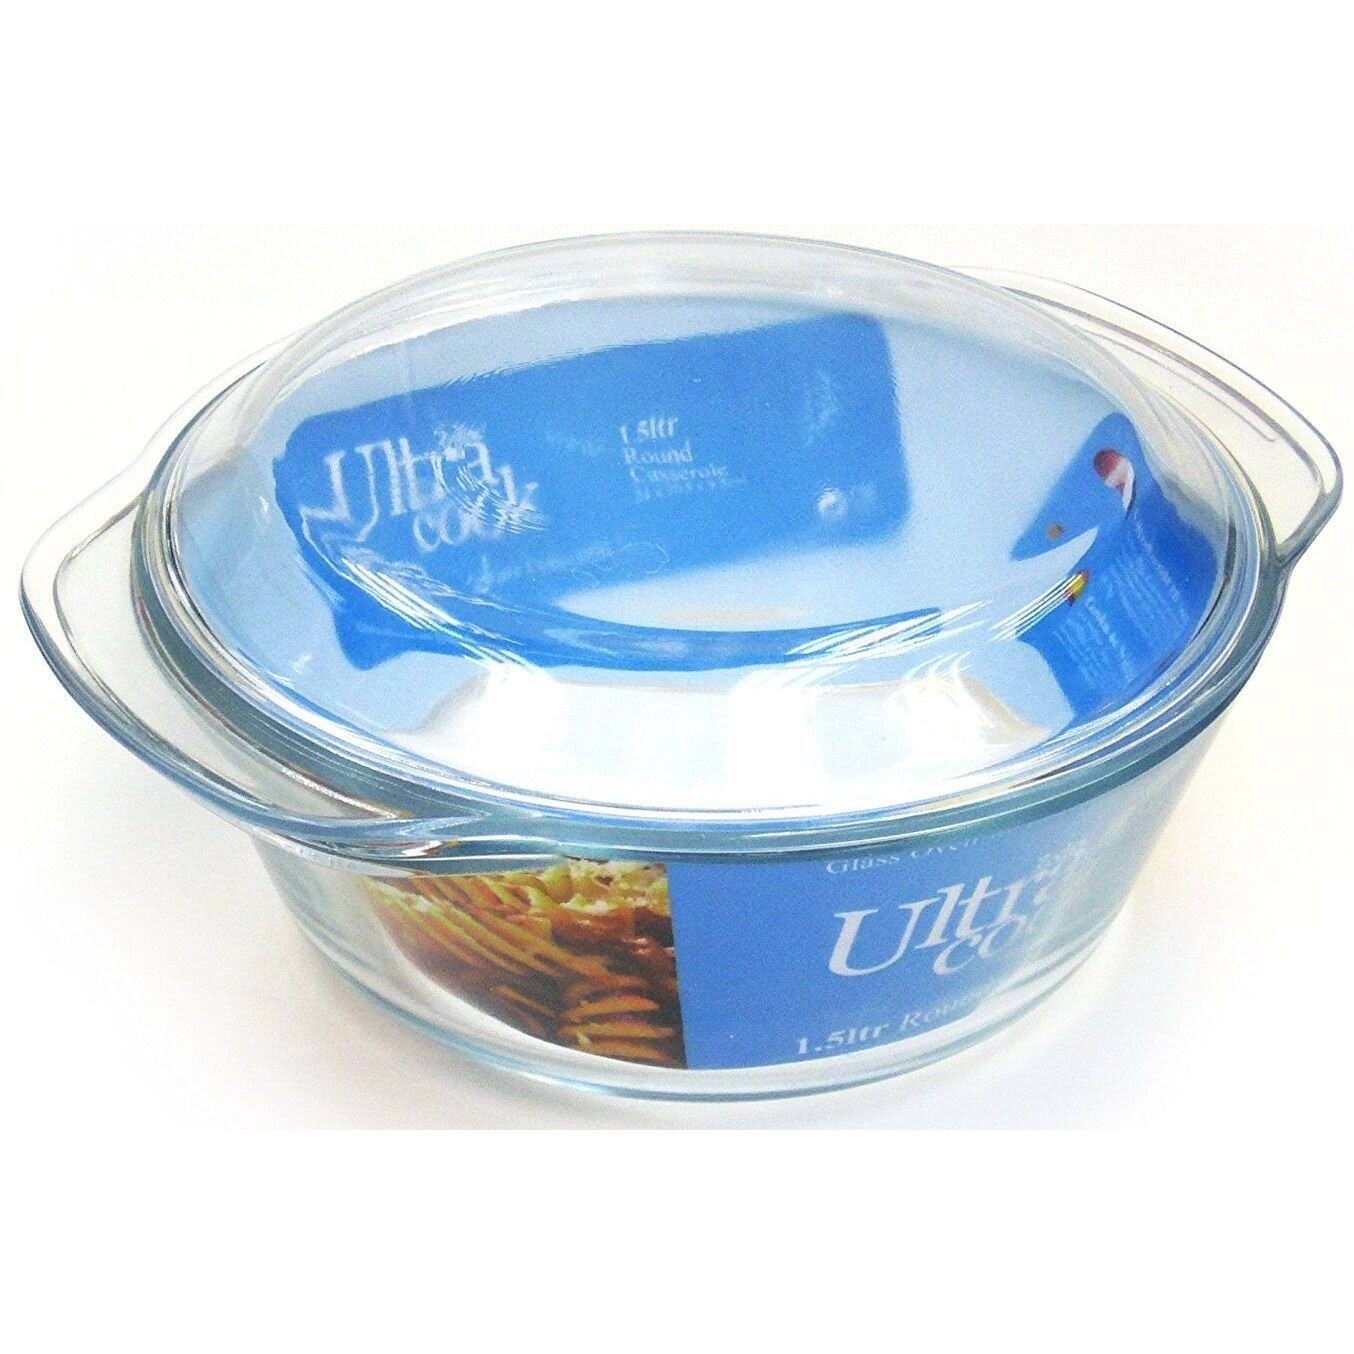 Ultracook Large 2.5 Litre Round Roaster Glass Round Casserole Dish & Lid 